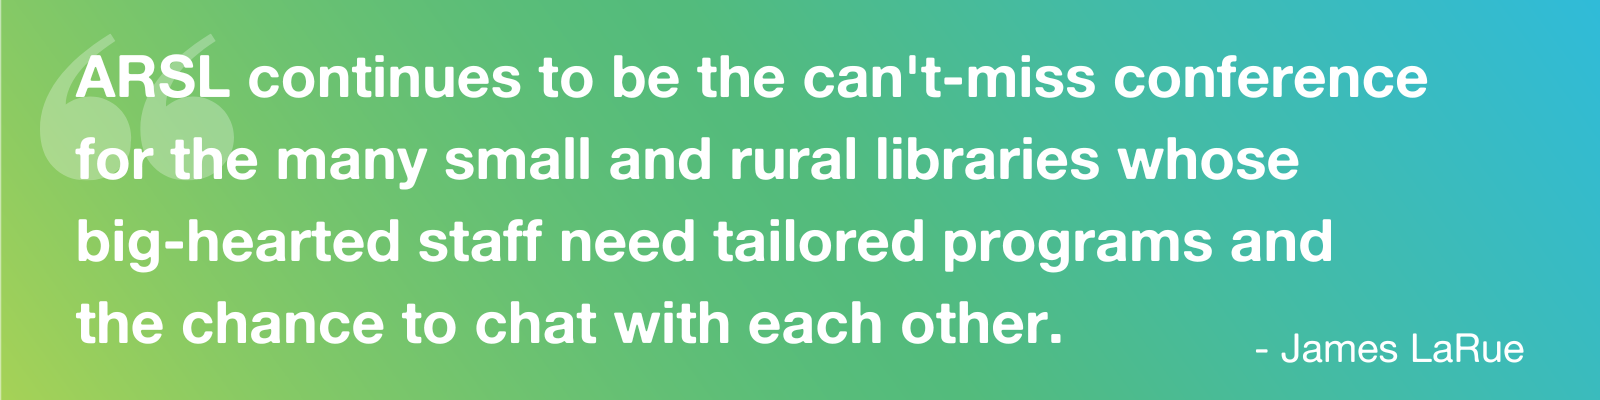 Quote: "ARSL continues to be the can't-miss conference  for the many small and rural libraries whose  big-hearted staff need tailored programs and  the chance to chat with each other. " - James LaRue